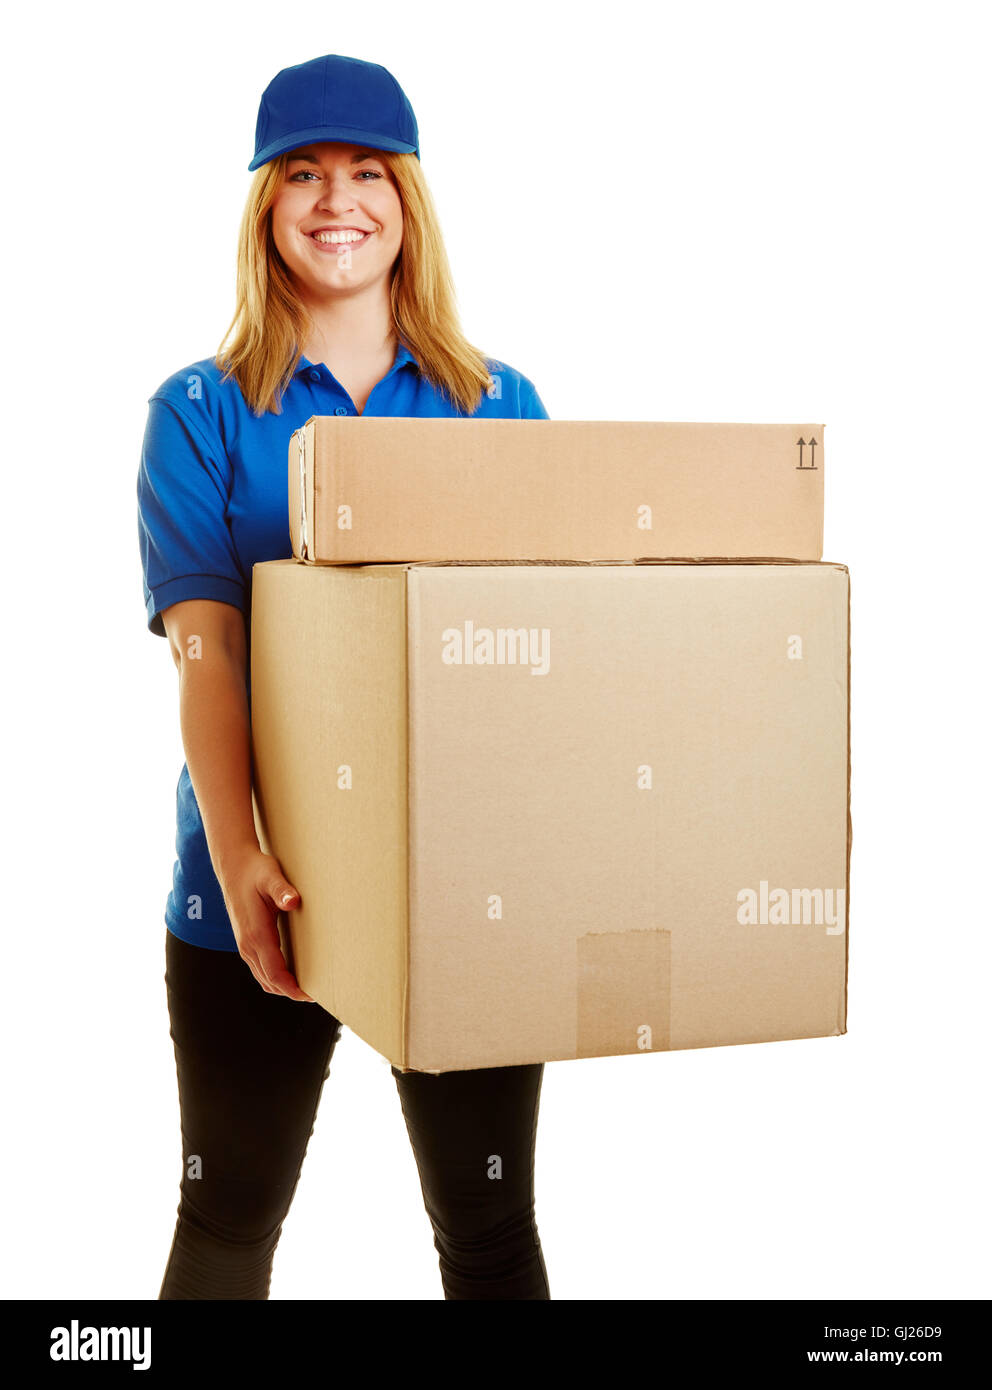 Woman as a parcel carrier with packages to deliver Stock Photo